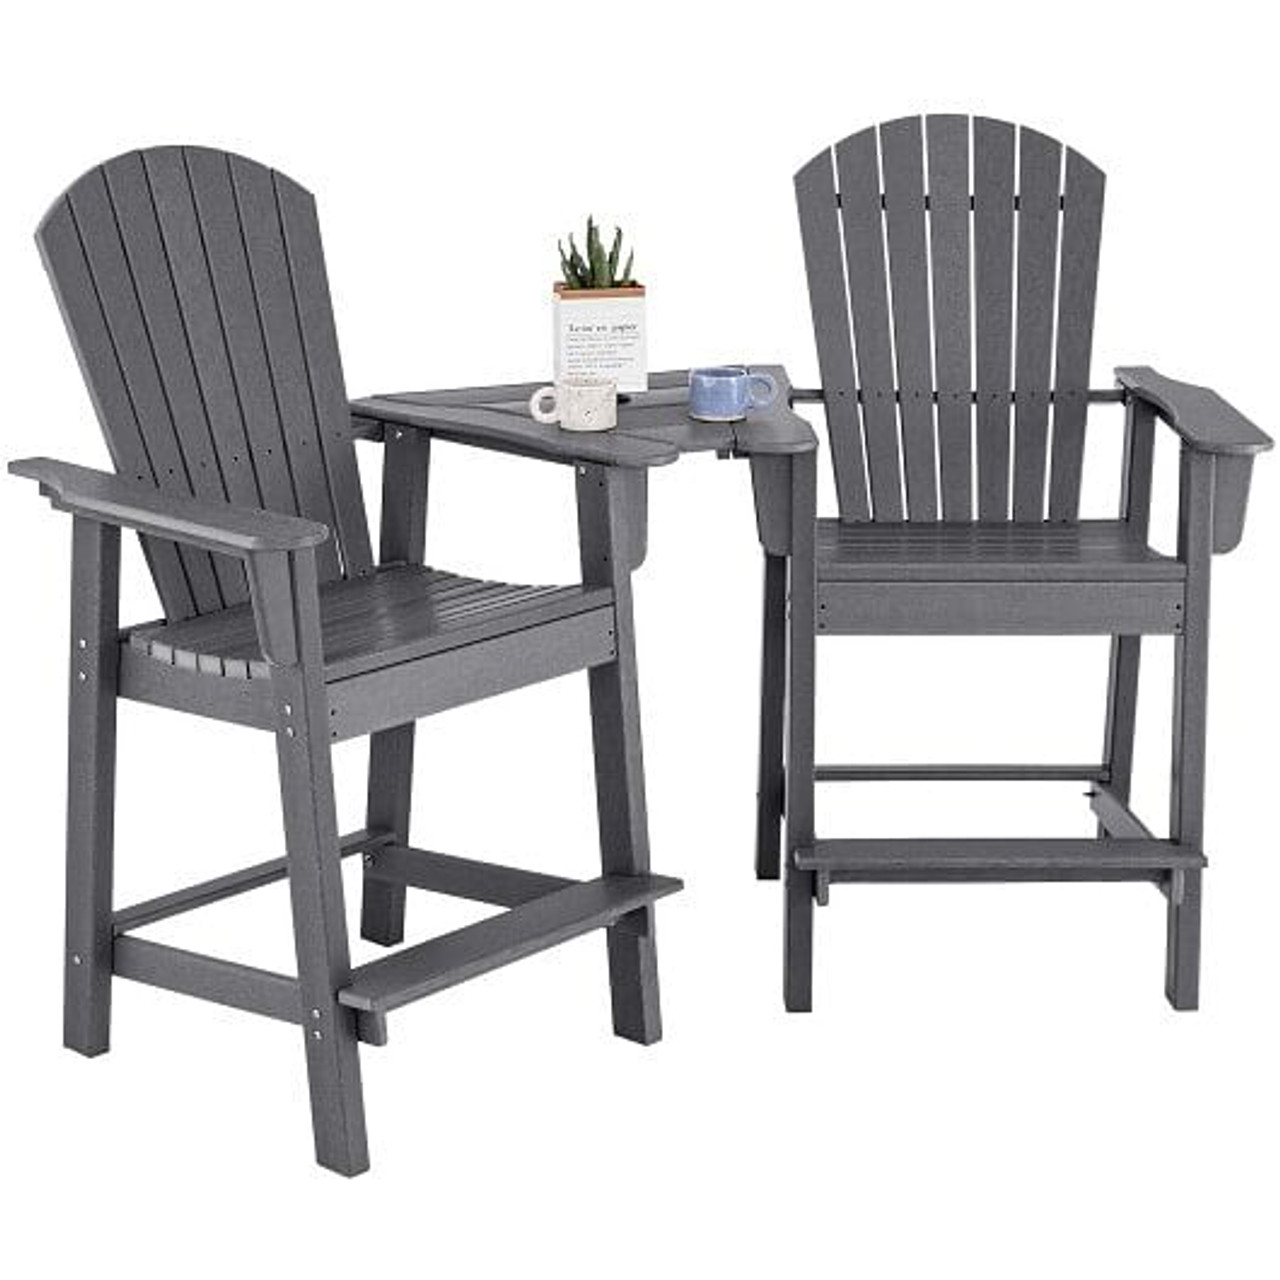 2 Pieces HDPE Tall Adirondack Chair with Middle Connecting Tray-Black